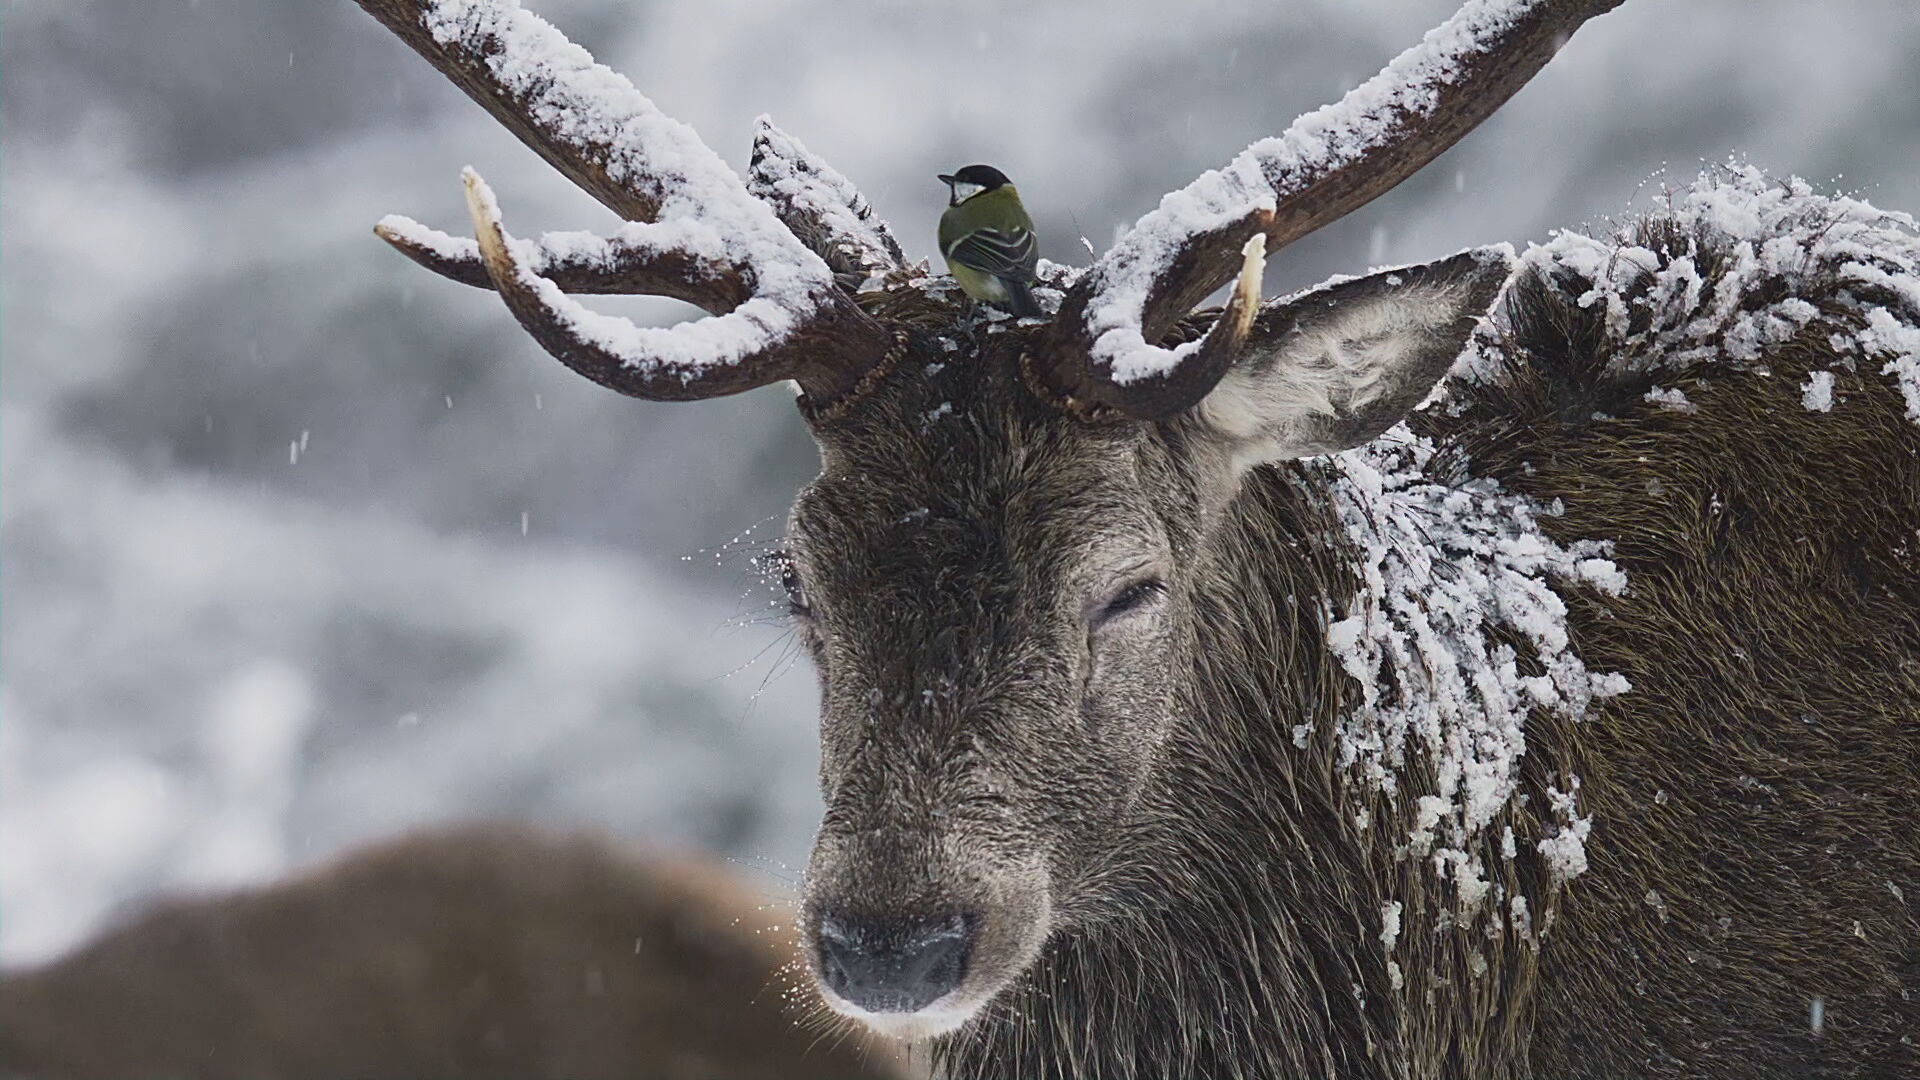 A stag deer with large antlers is seen covered in snow, with a small bird perched on its head.